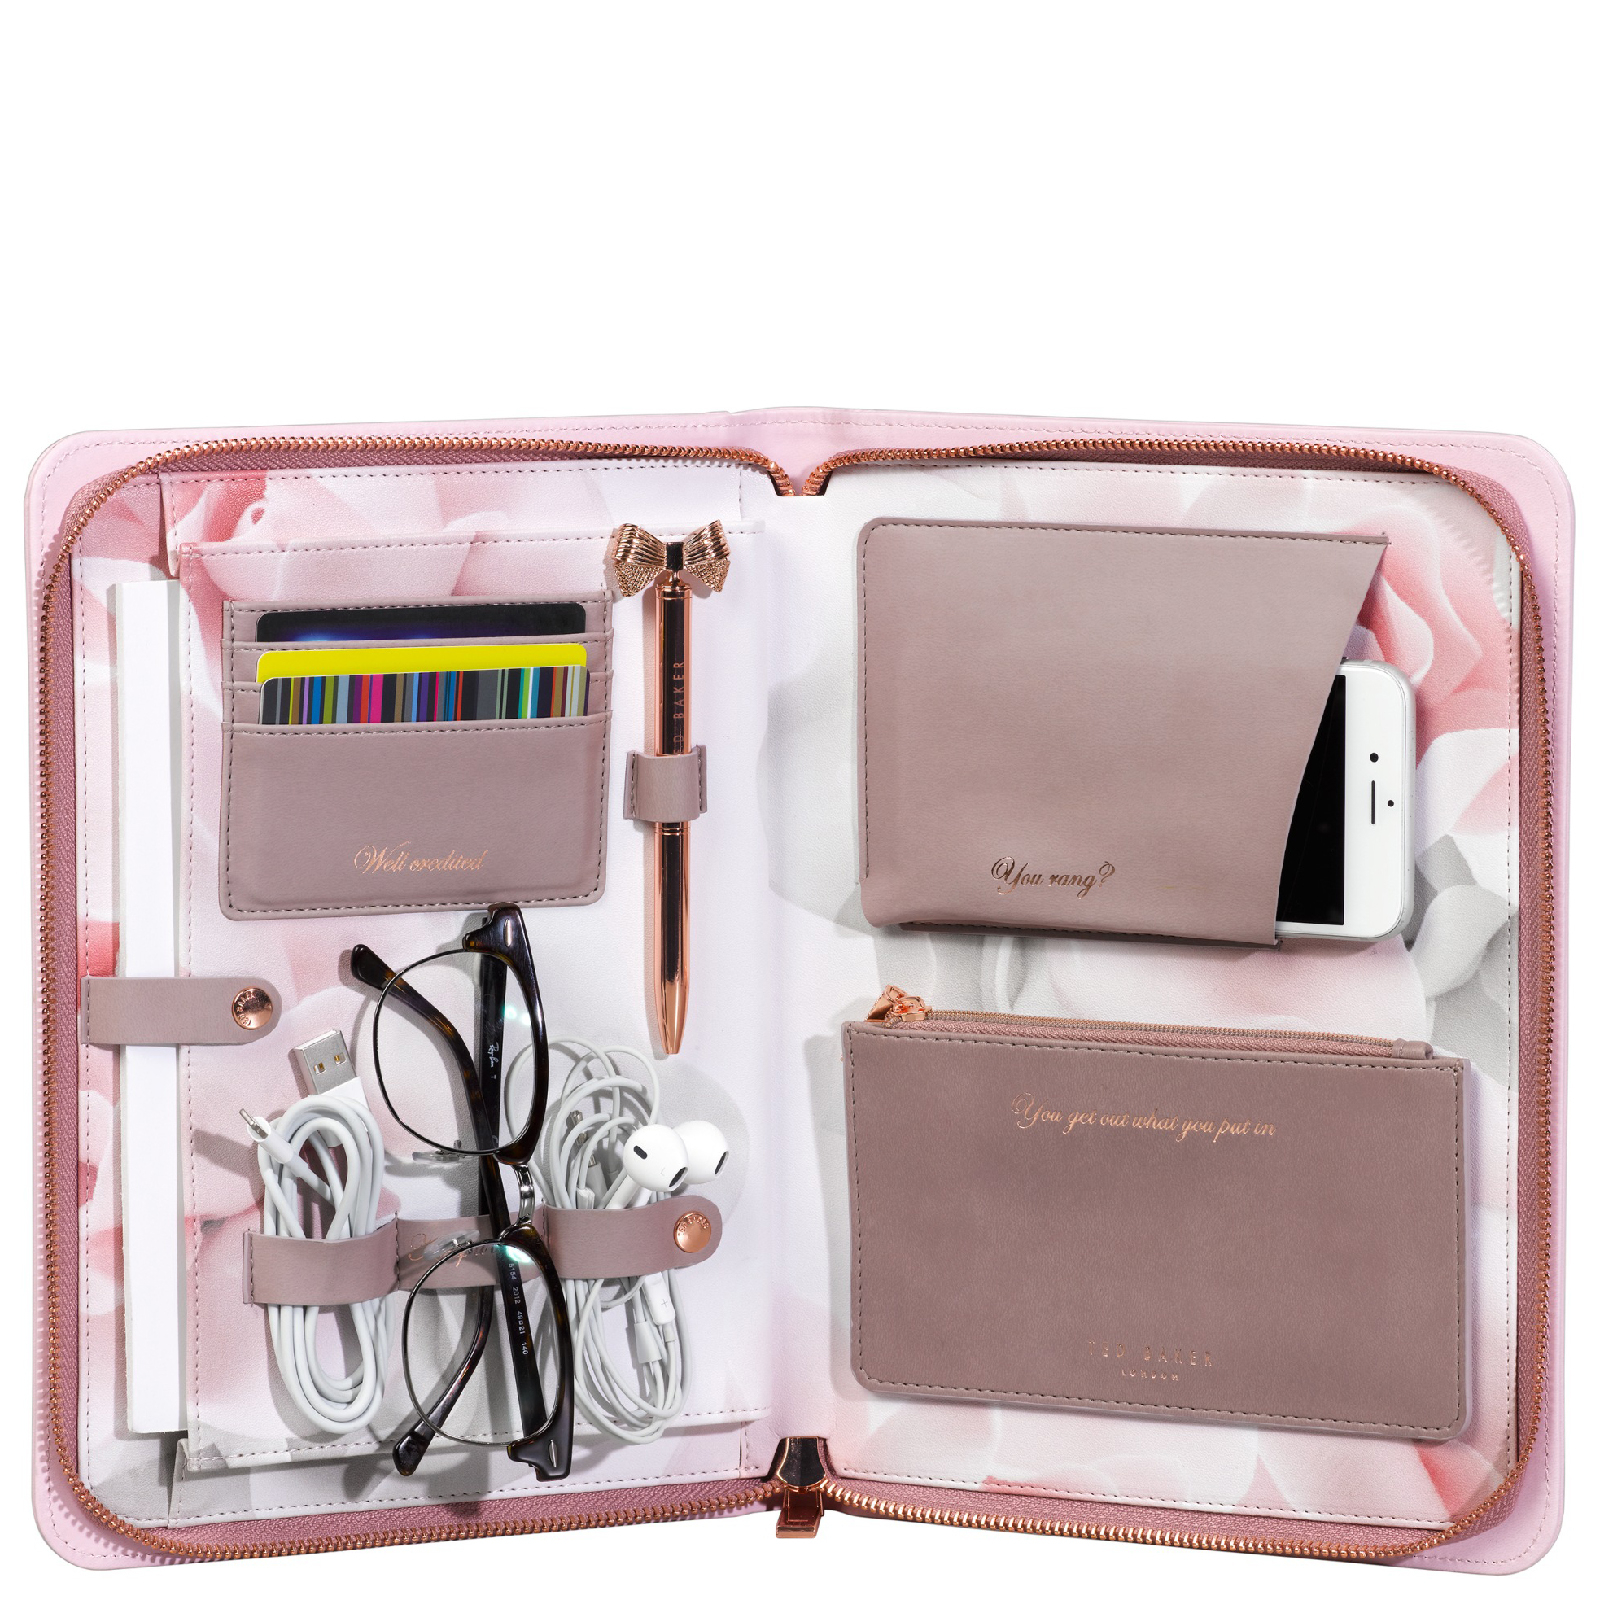 ted baker travel journal and planner